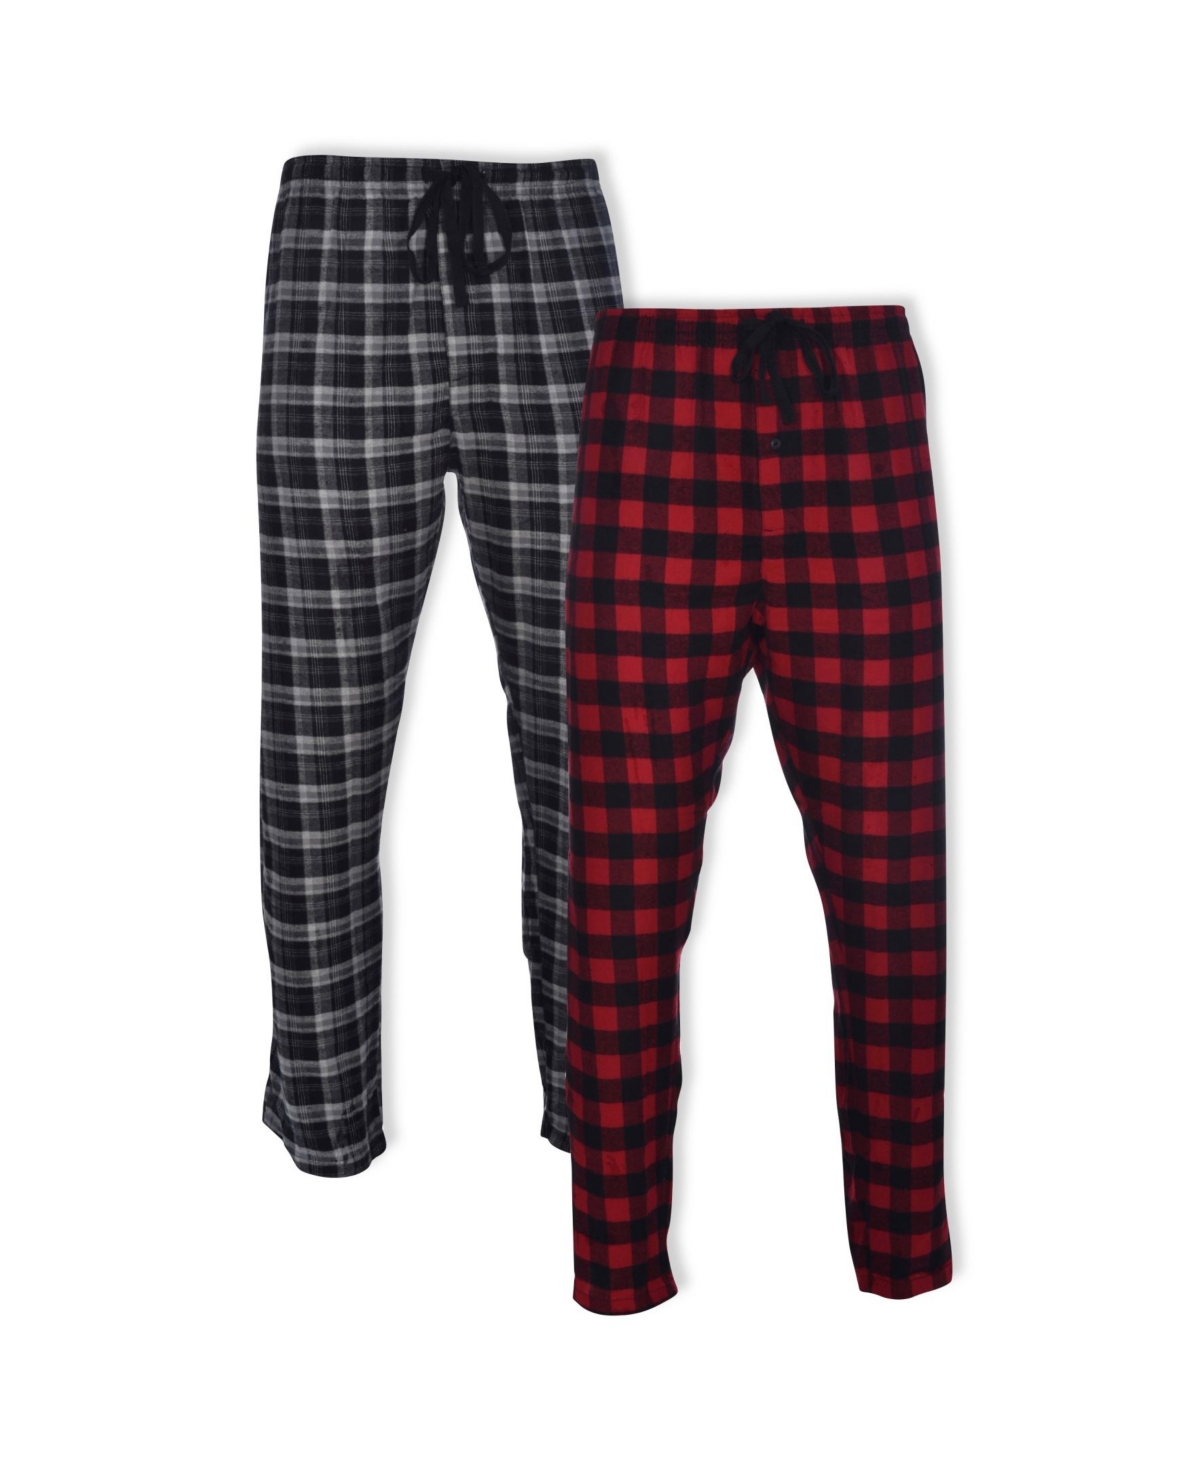 Hanes Men's Flannel Sleep Pant, 2 pack - Red/Black Buffalo and Black Plaid